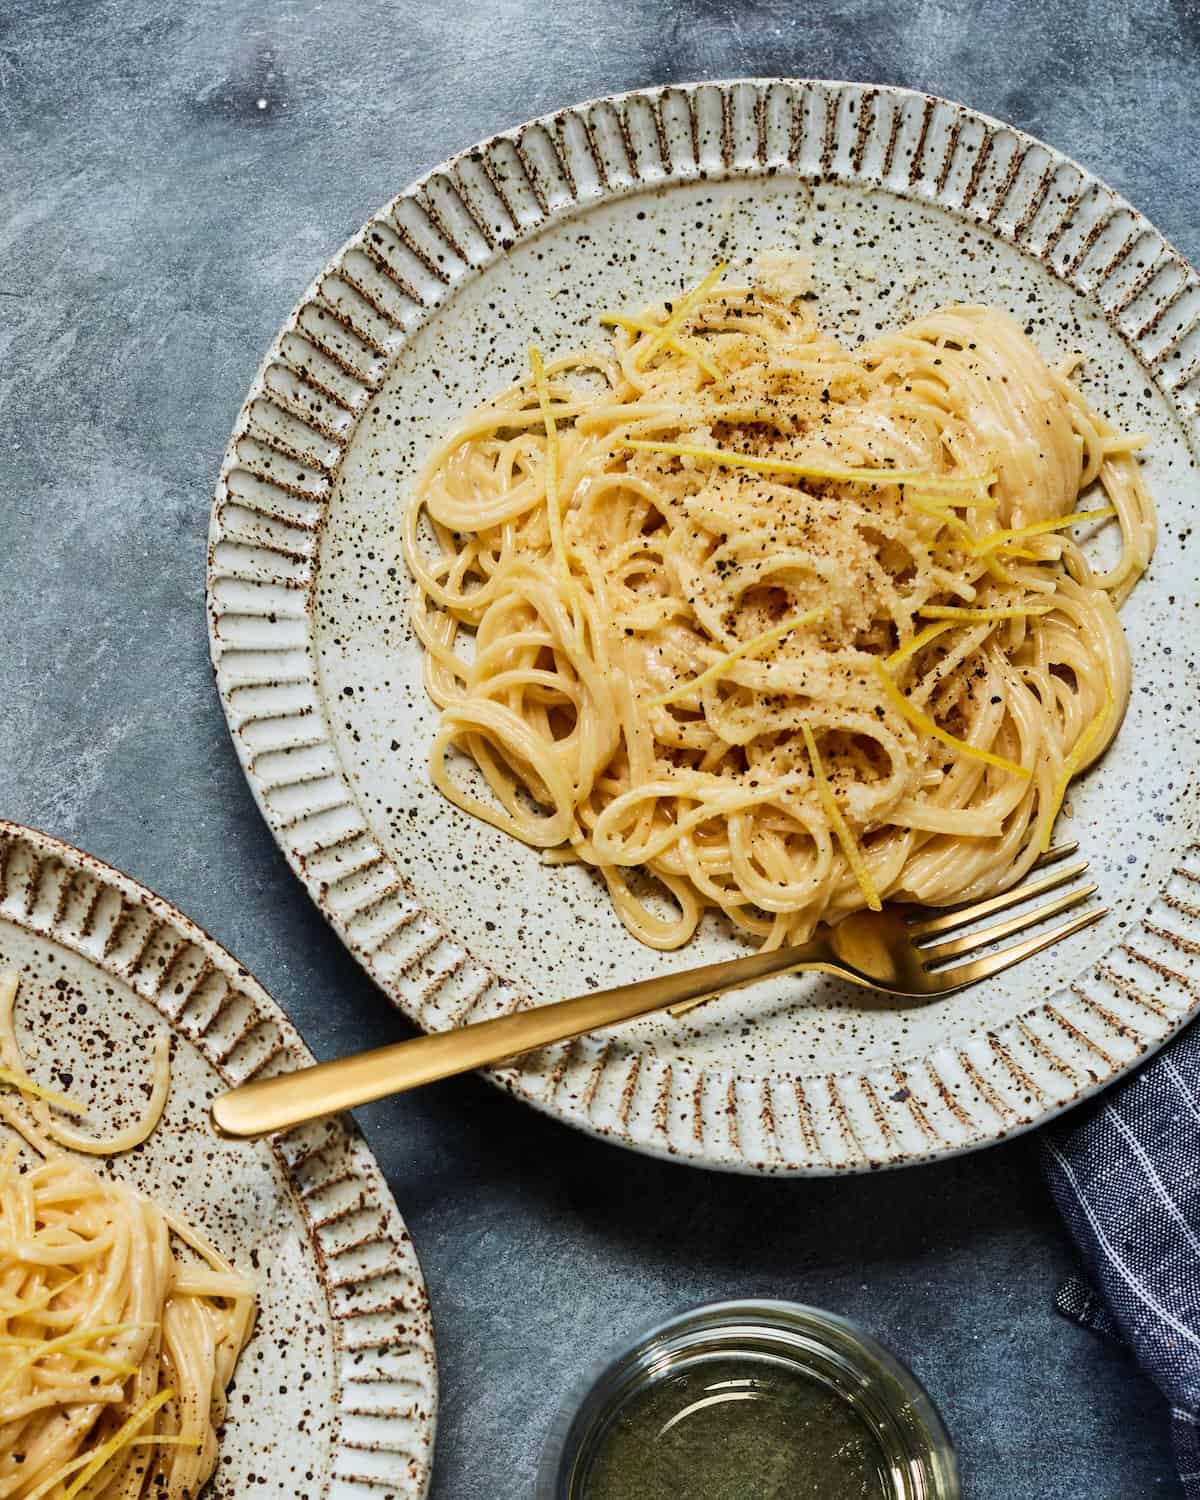 A speckled plate with a gold fork holds the final dish of Creamy Lemon Cacio e Pepe.  